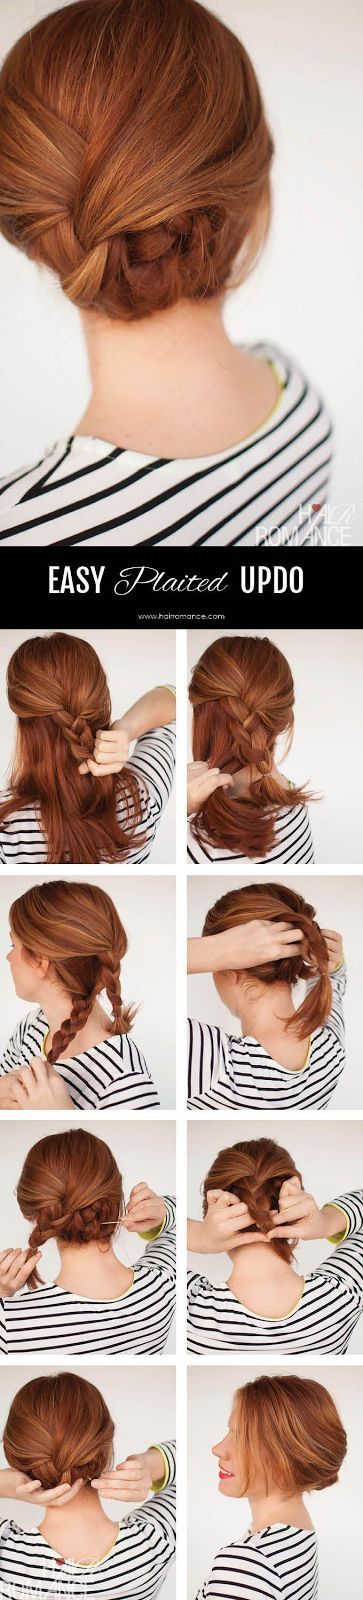 EASY PLAITED UPDO HAIRSTYLE TUTORIAL...